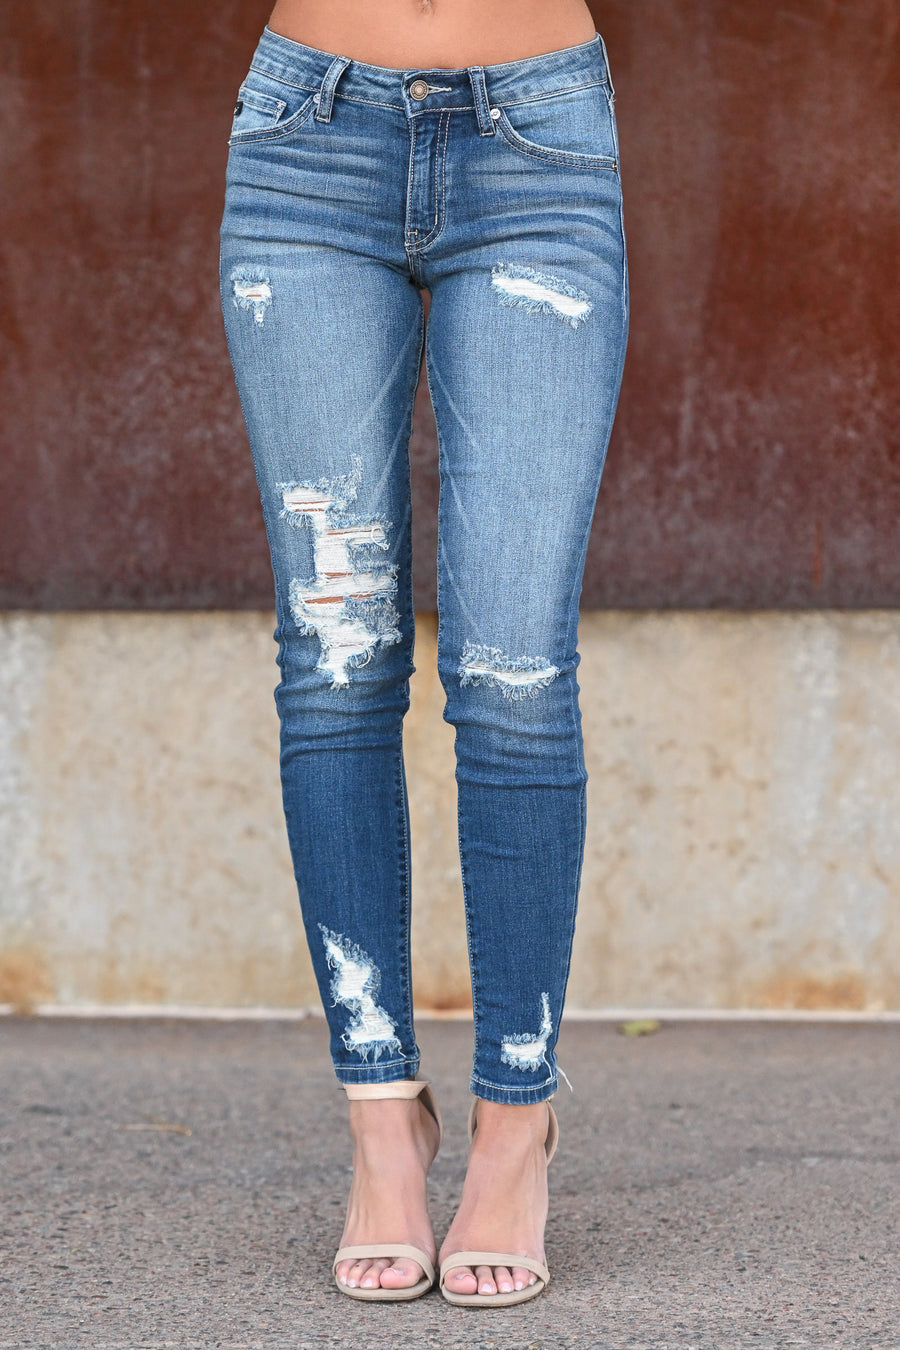 Boutique Jeans | Classic & Trendy Styles Shipped Free | Closet Candy ...